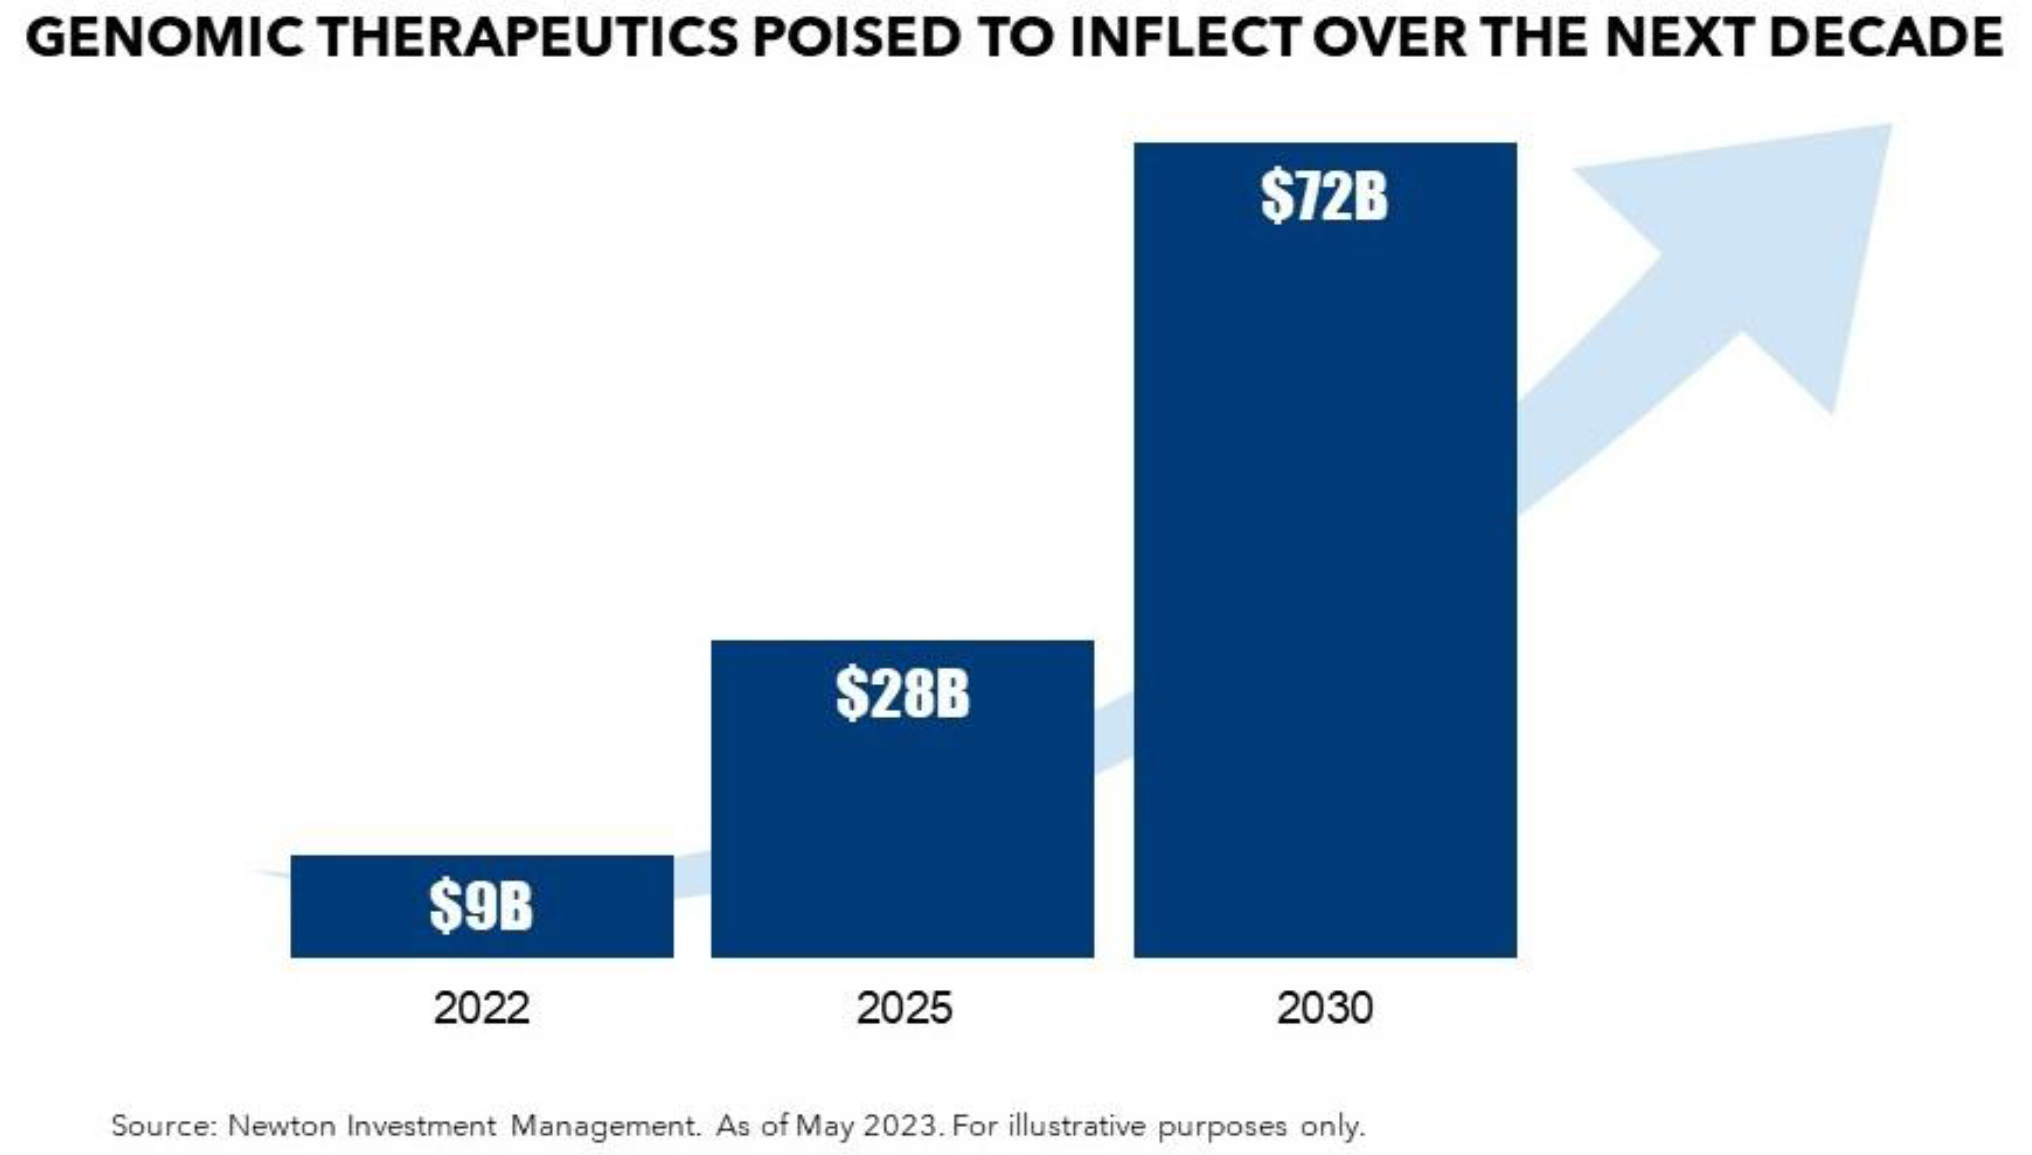 Graph of genomic therapeutics growth over the next decade